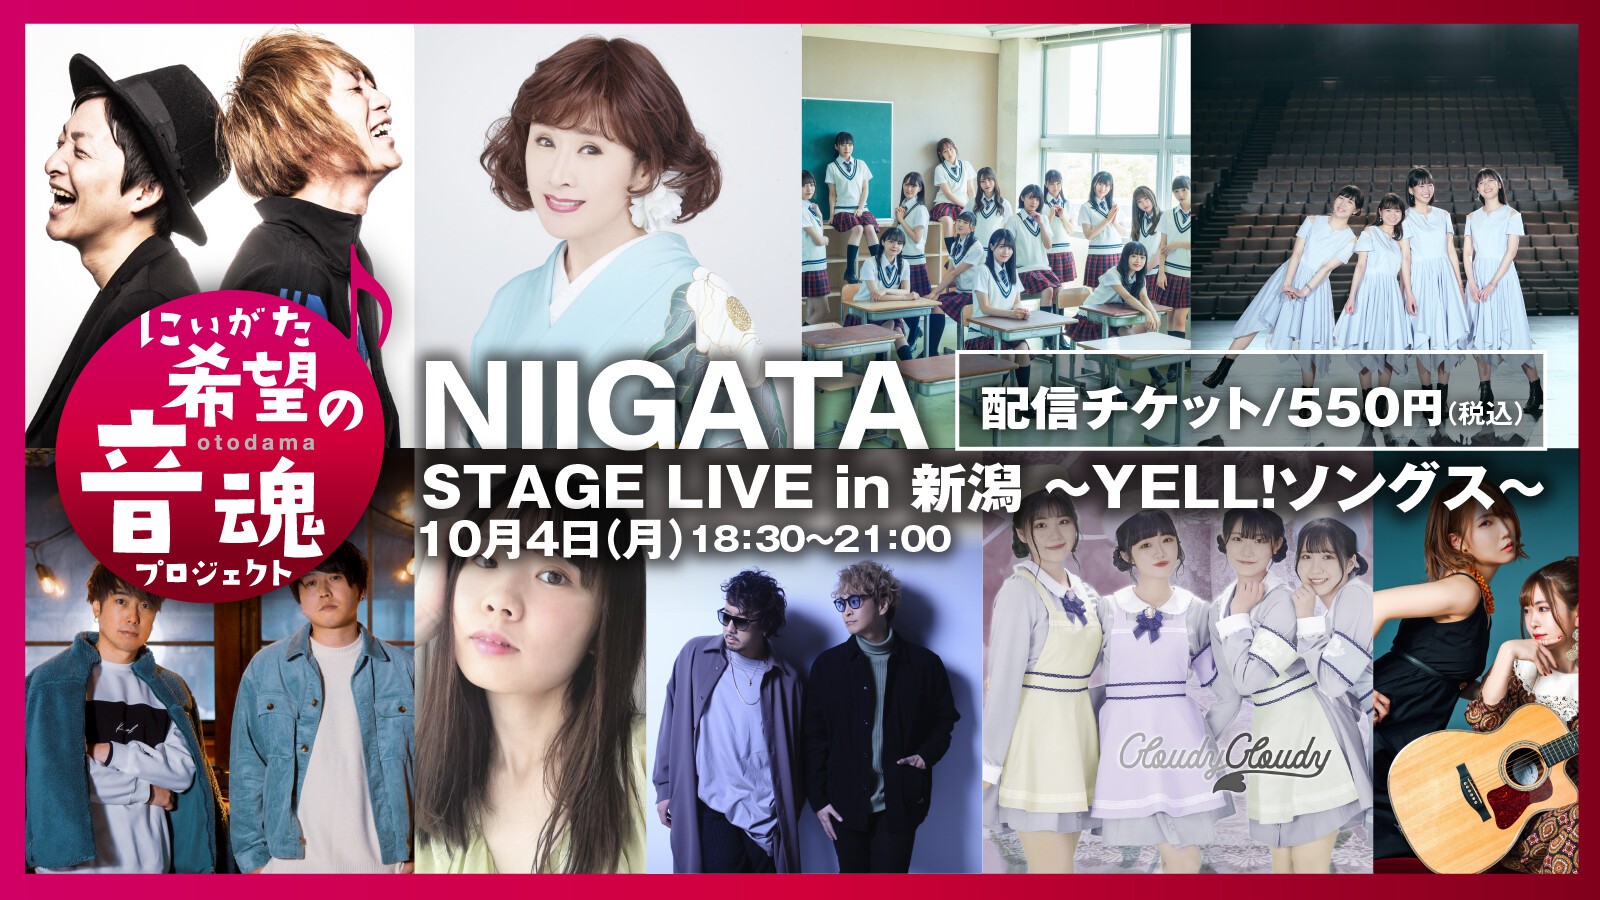 STAGE LIVE in 新潟 YELL!ソングス / 10.04 (Mon) @ Online